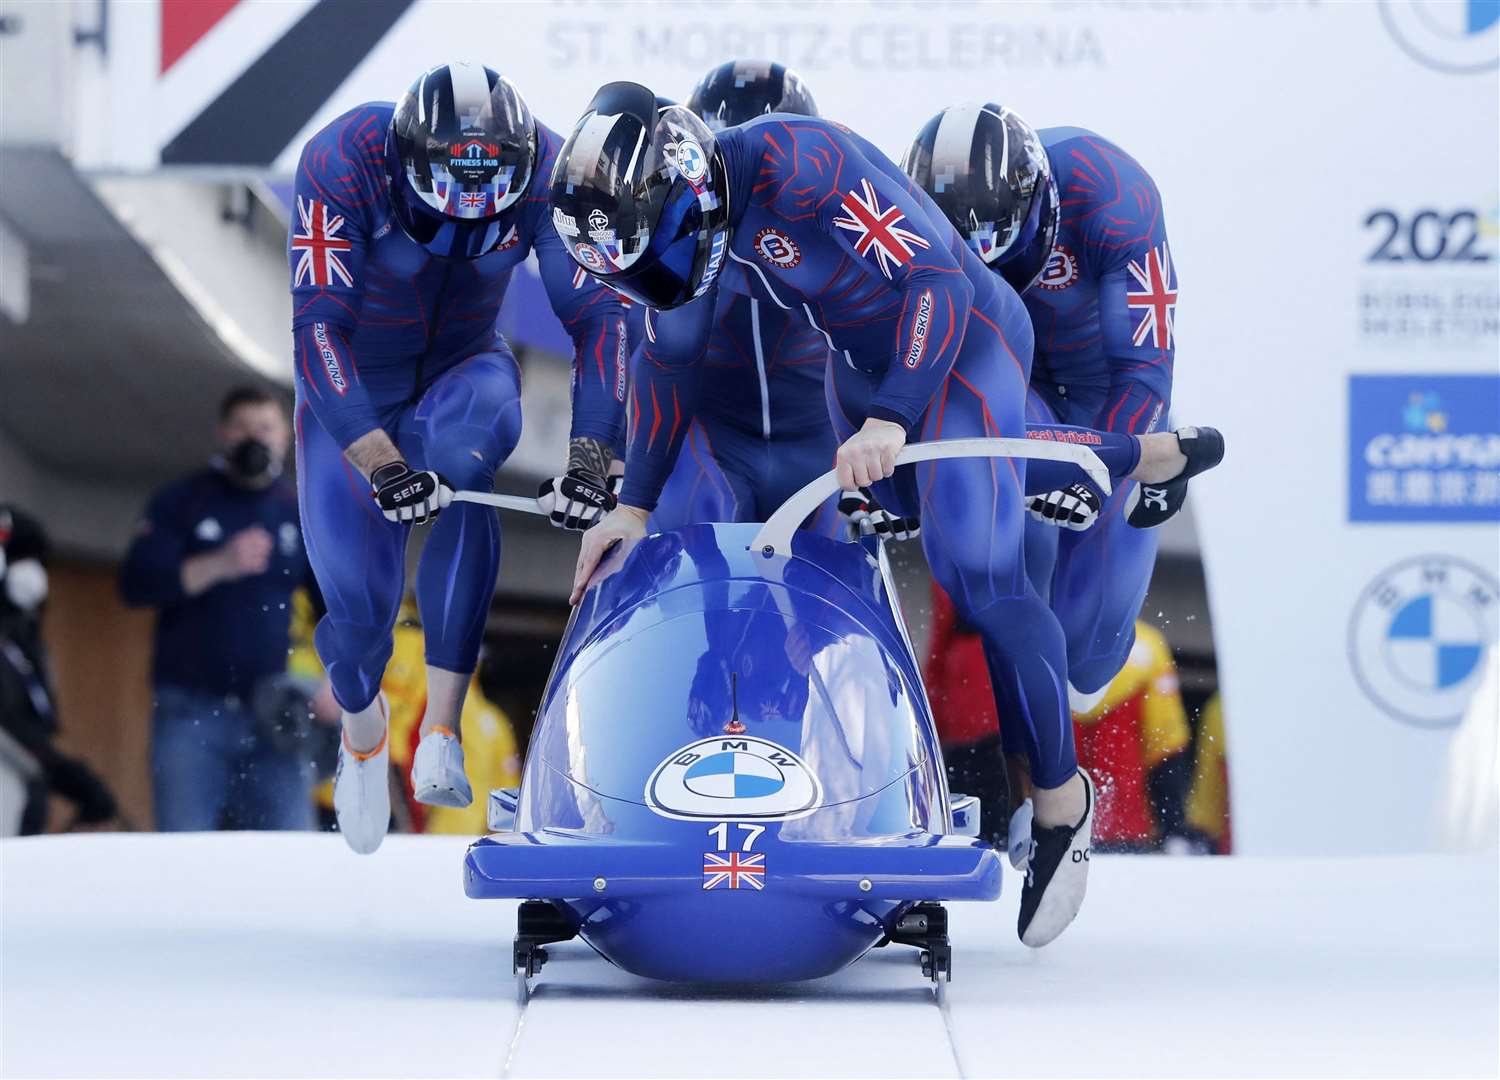 Taylor Lawrence was part of Team GB's bobsleigh team - pictured in World Cup action earlier in 2022. Picture: Reuters/Arnd Wiegmann (54718662)